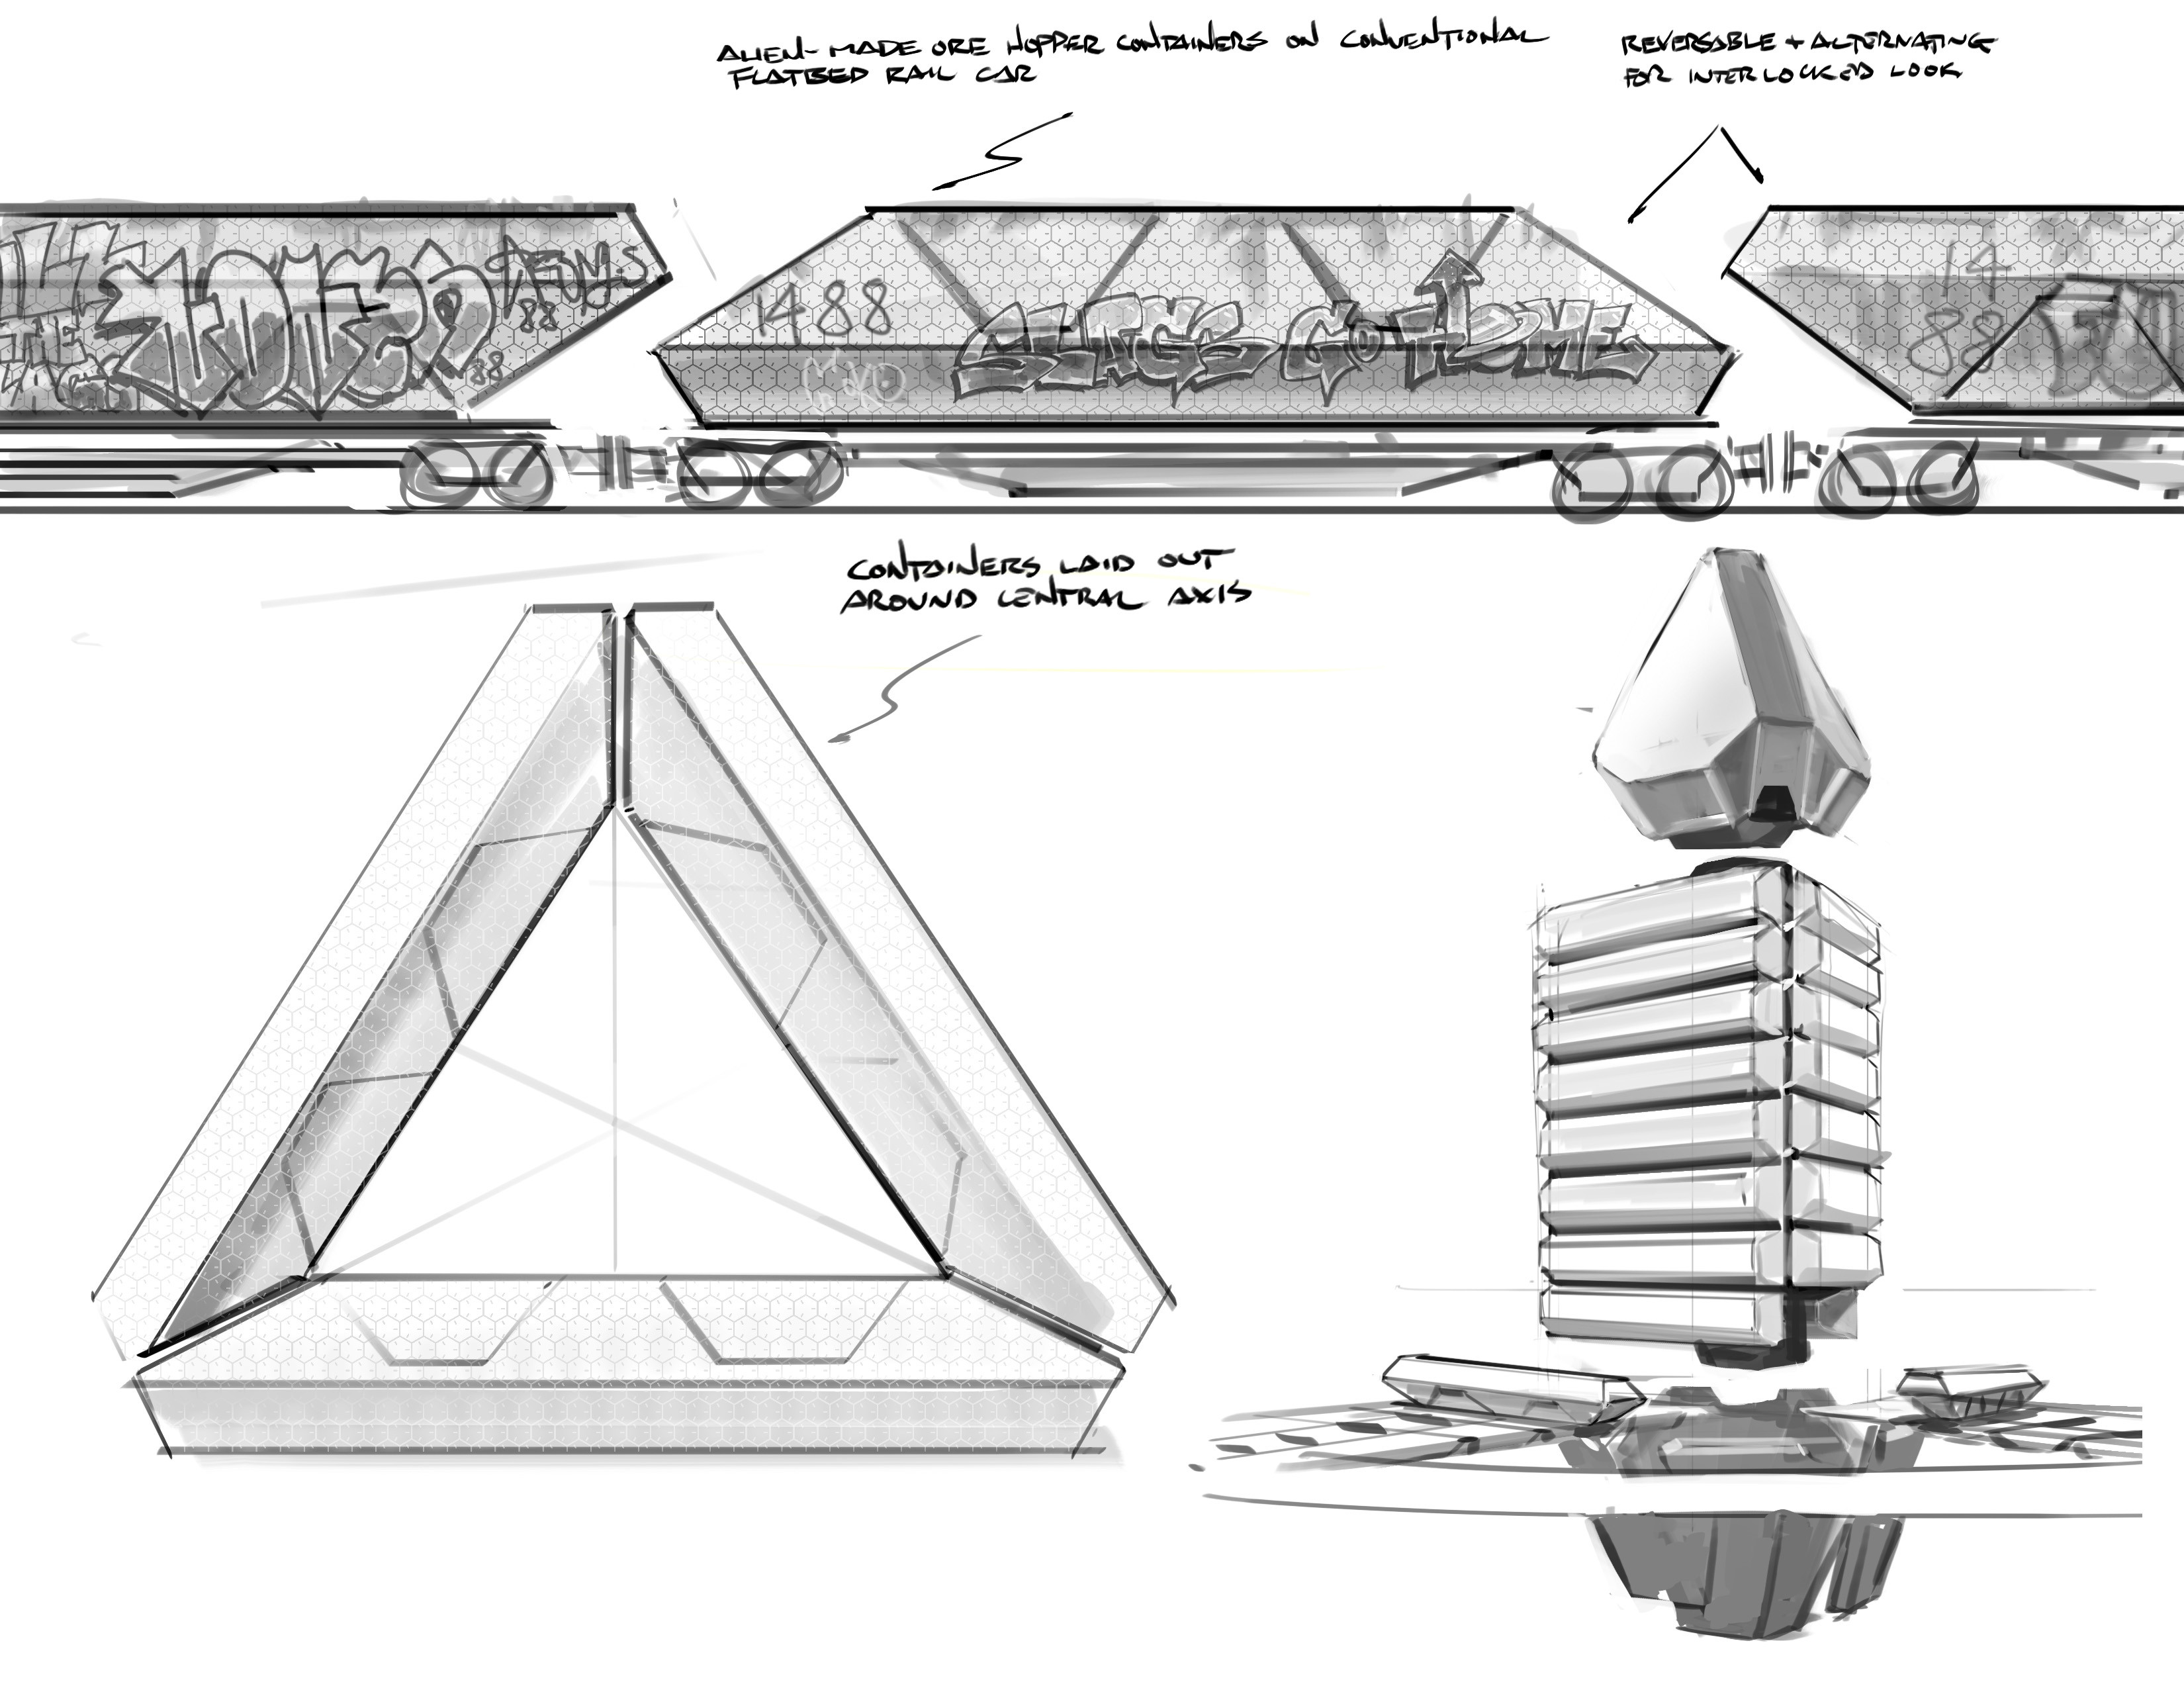 A quick sketch to come up with an ore hopper system for the cargo ships.